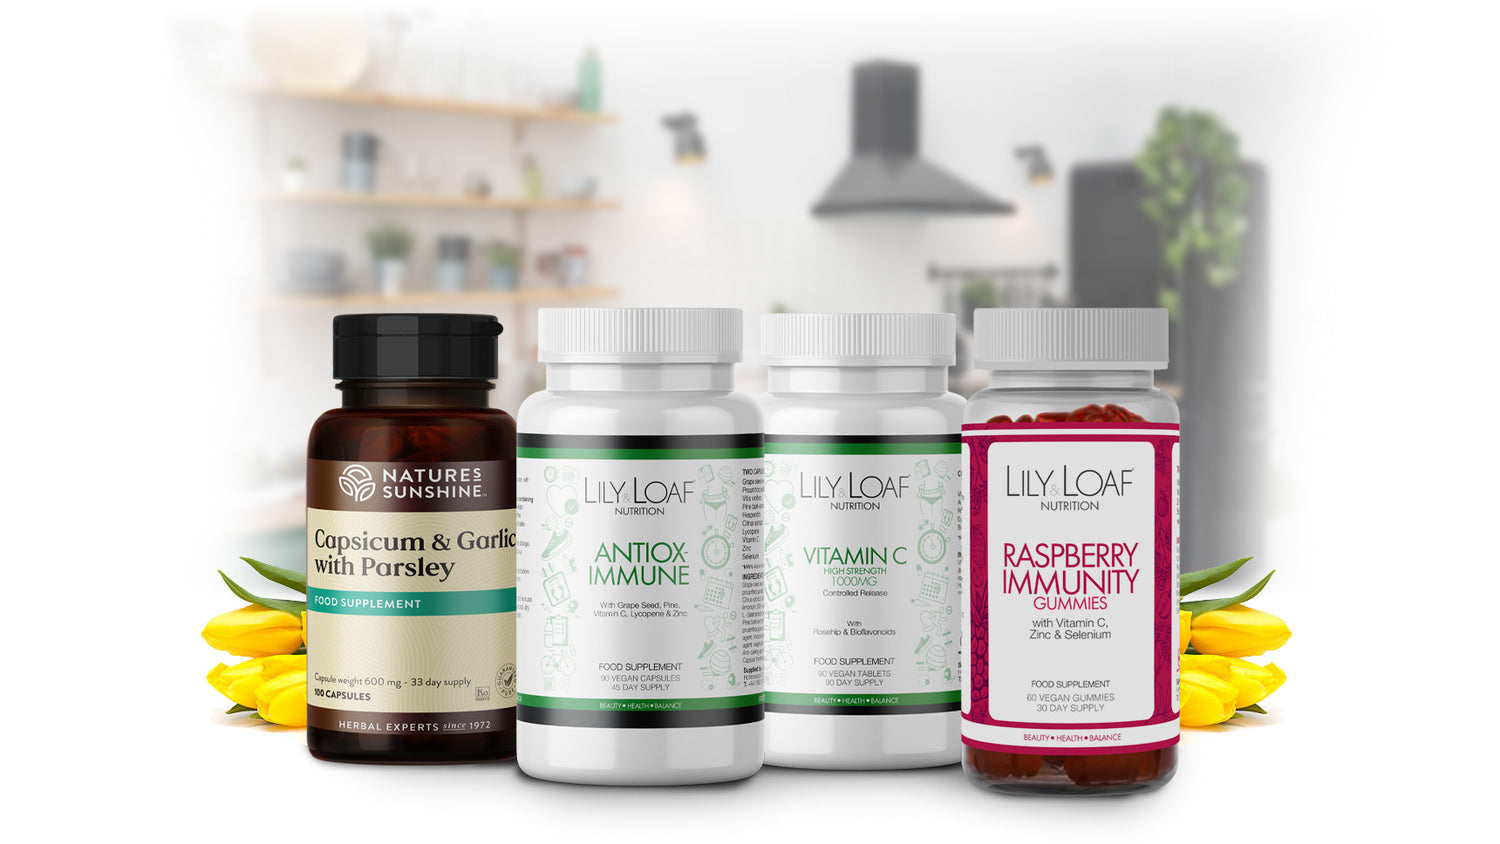 Lily & Loaf's supplement lineup for immunity, featuring natural ingredients for health support.